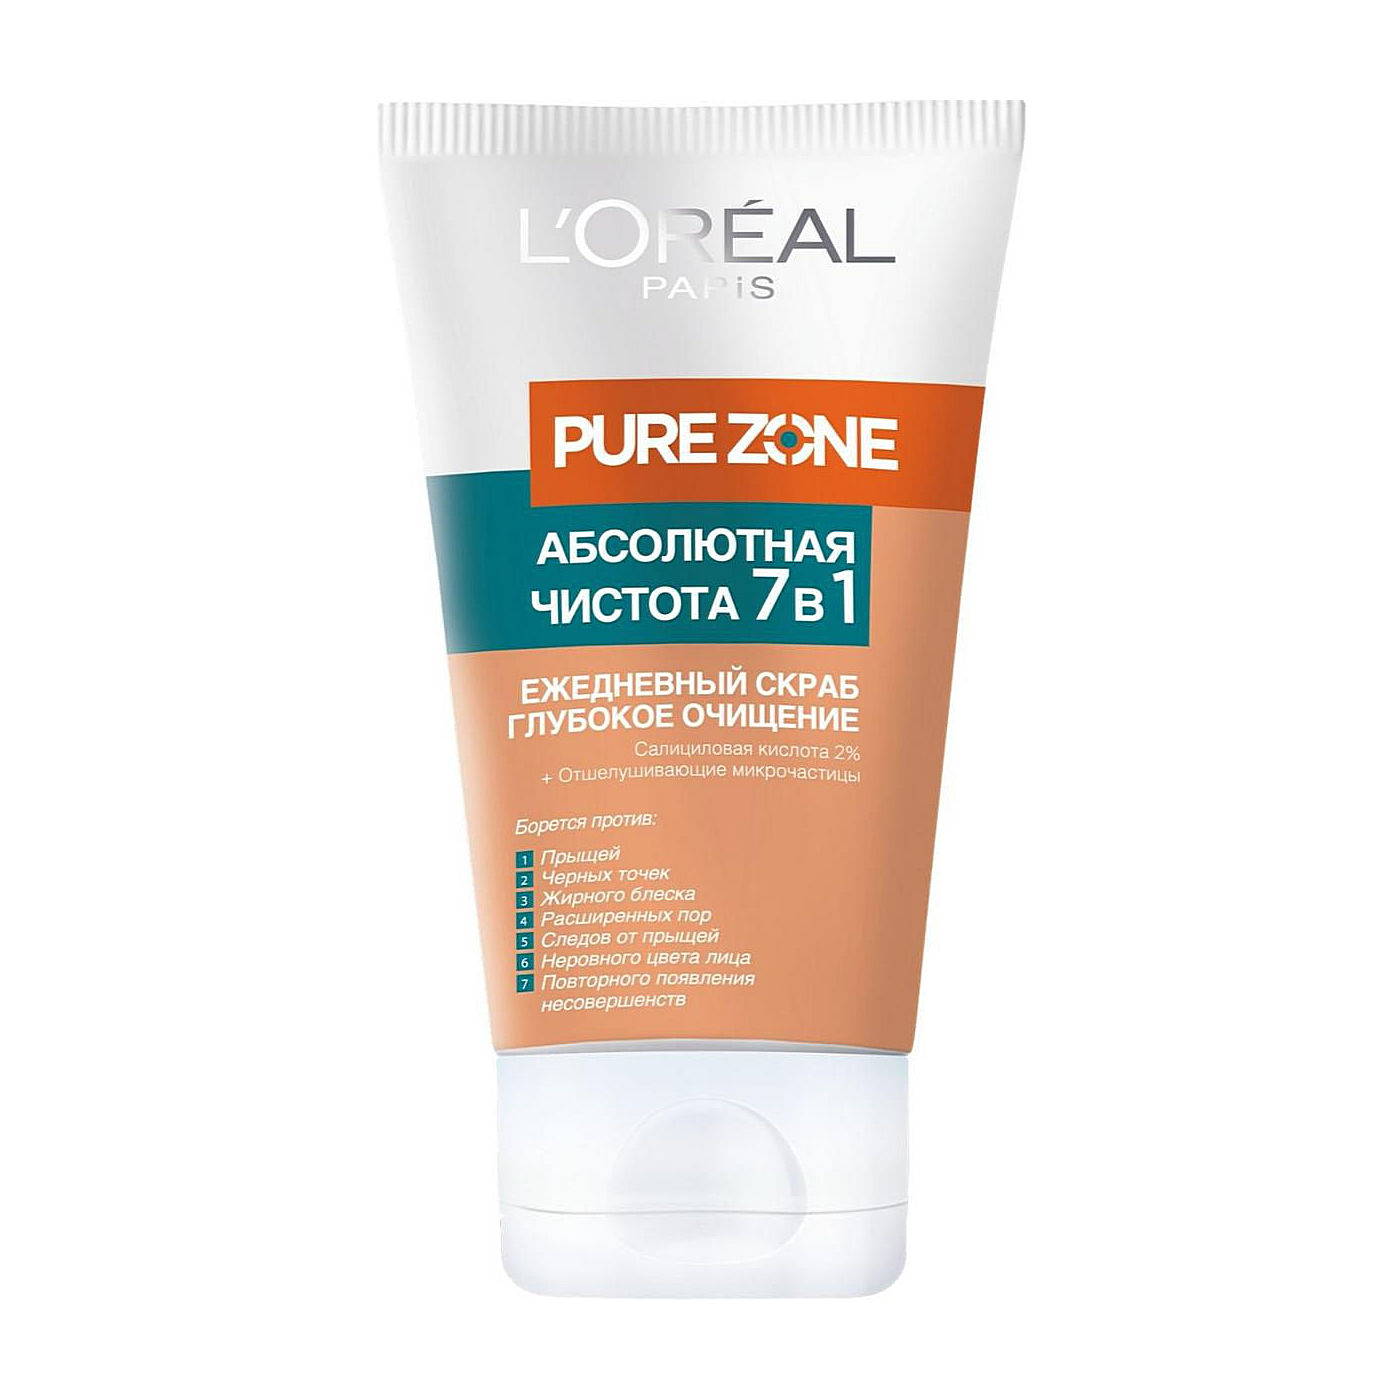 Скраб лореаль. L'Oreal Paris скраб для лица "Pure Zone. Loreal Pure Zone скраб для лица 7 в 1. Лореаль Париж скраб для лица 7в1. Скраб Loreal Pure Zone 80ml.